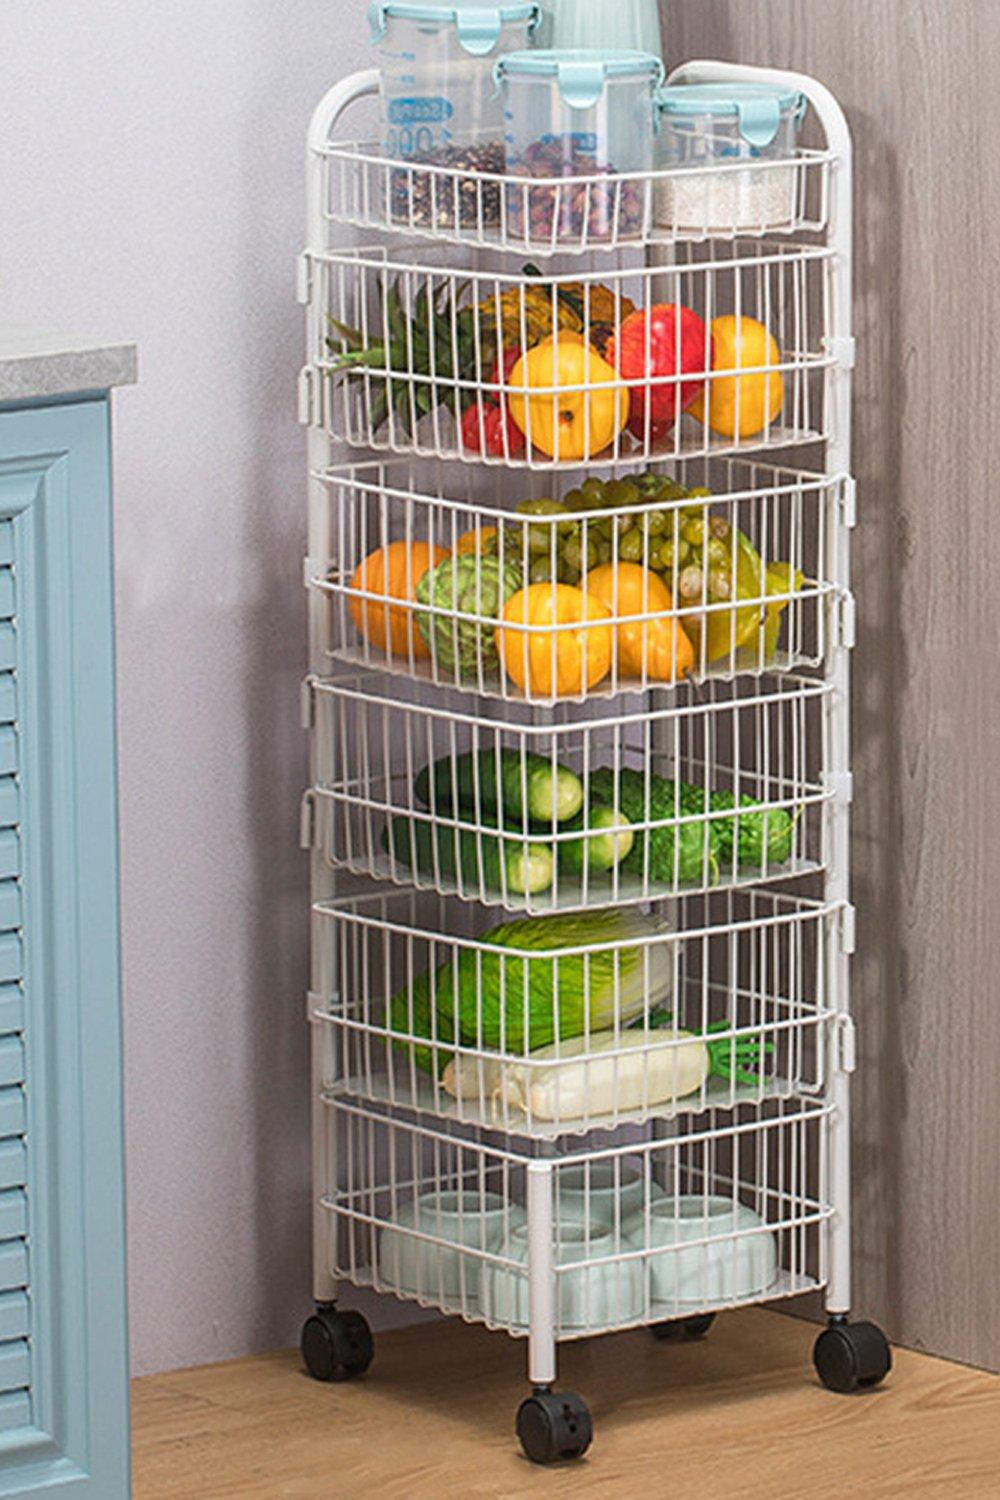 4-Layer Detachable Rotating Trolley Cart Scalable Spice Rack Vegetable Fruit Storage Basket Organize